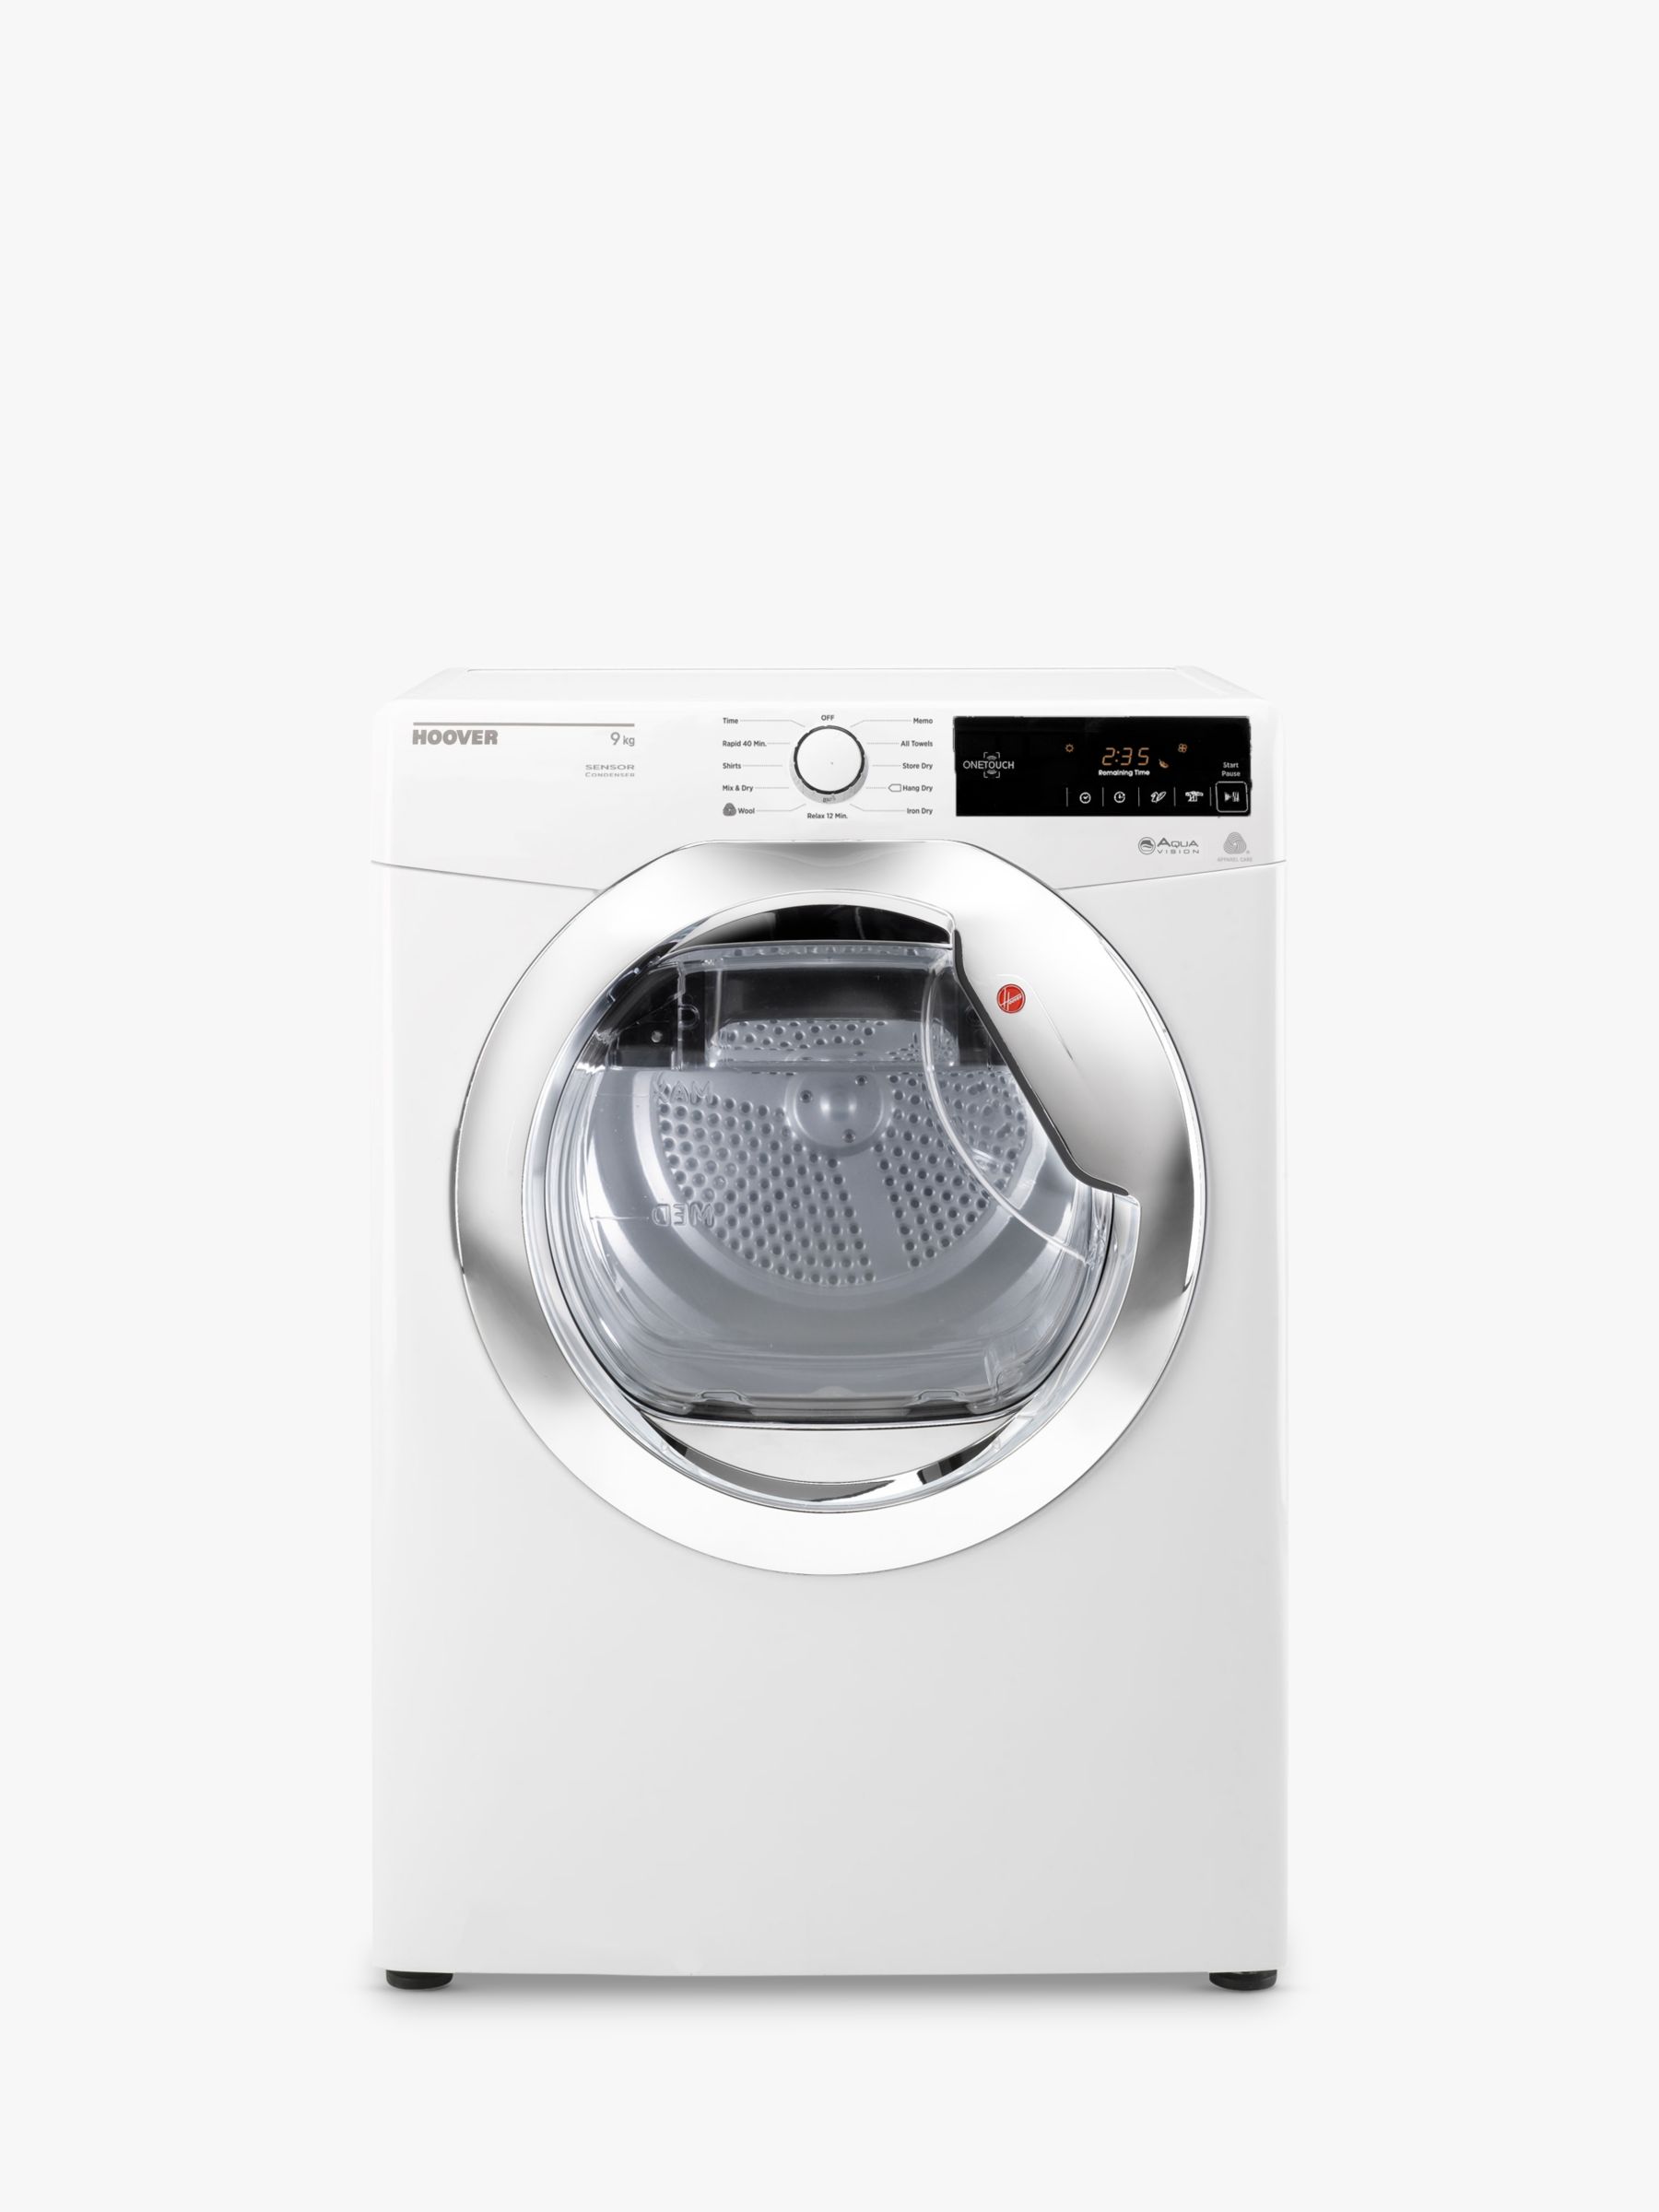 Hoover DXC9TCE Freestanding Condenser Tumble Dryer, 9kg Load, B Energy Rating, White